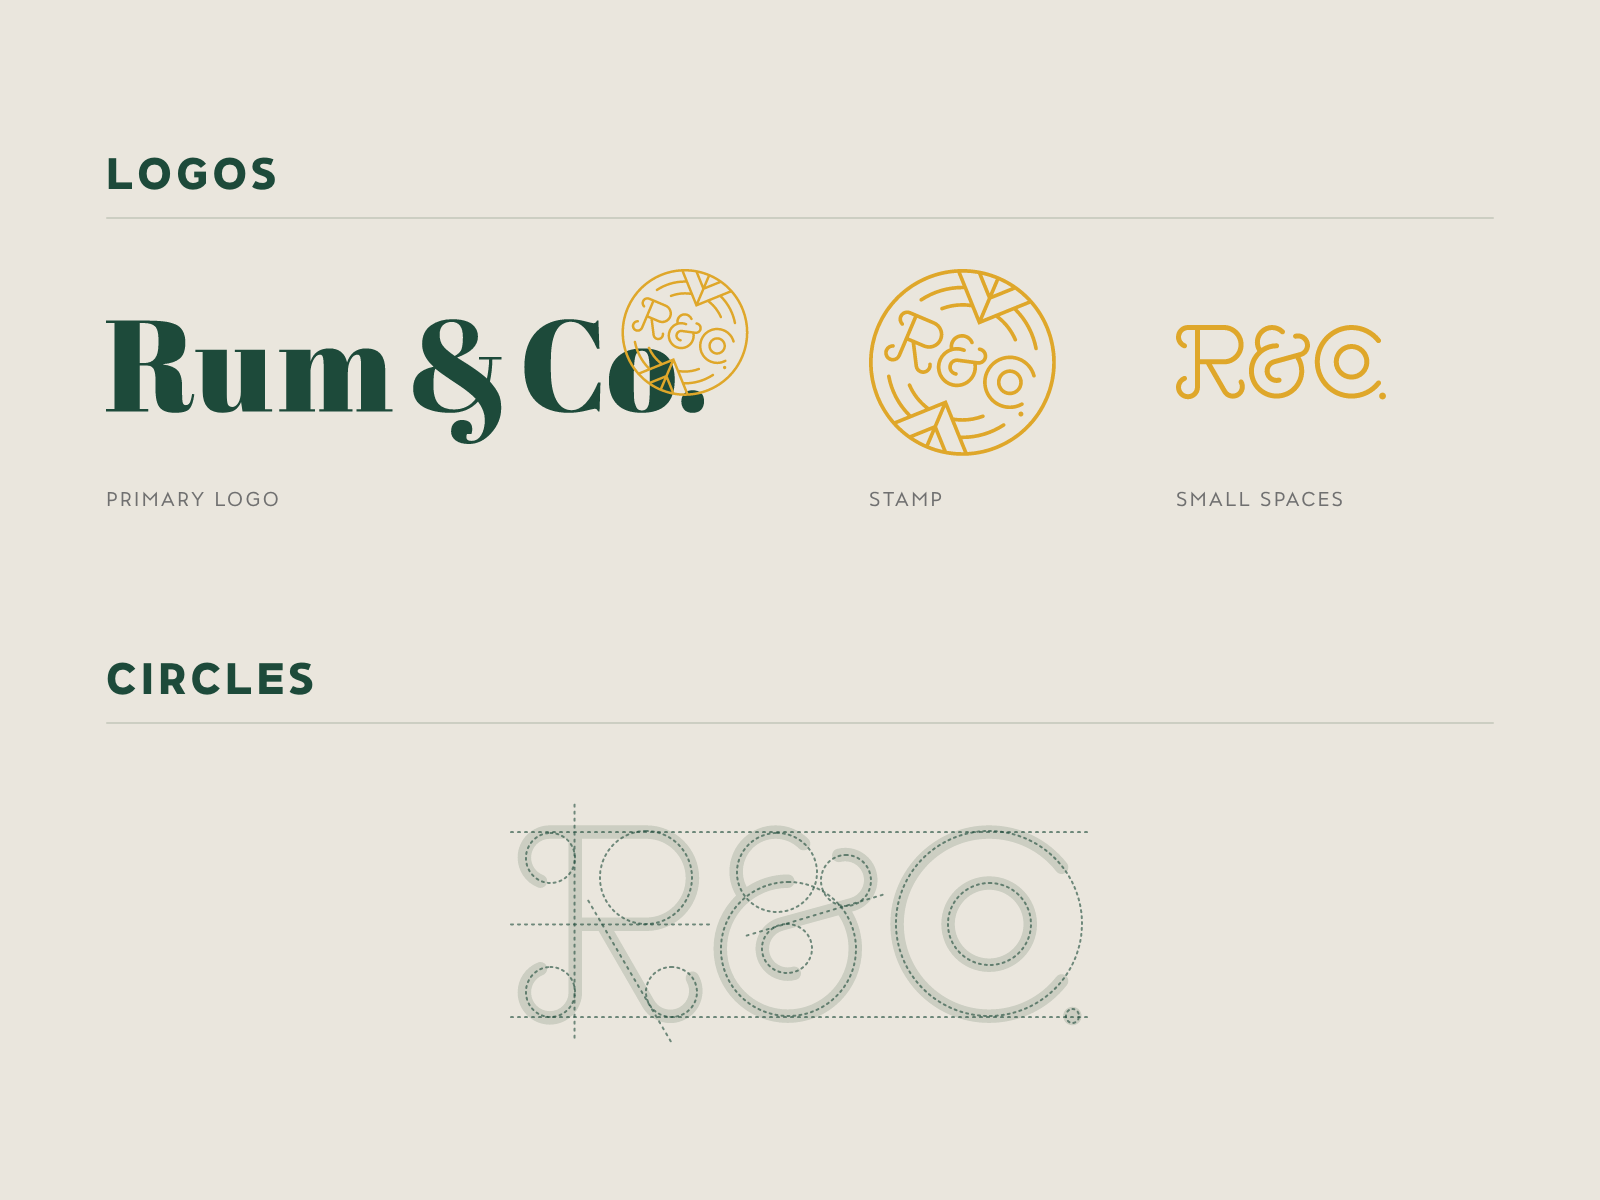 Ice Stamp Rum & Co. by Chas Turansky for Nikao Studio on Dribbble